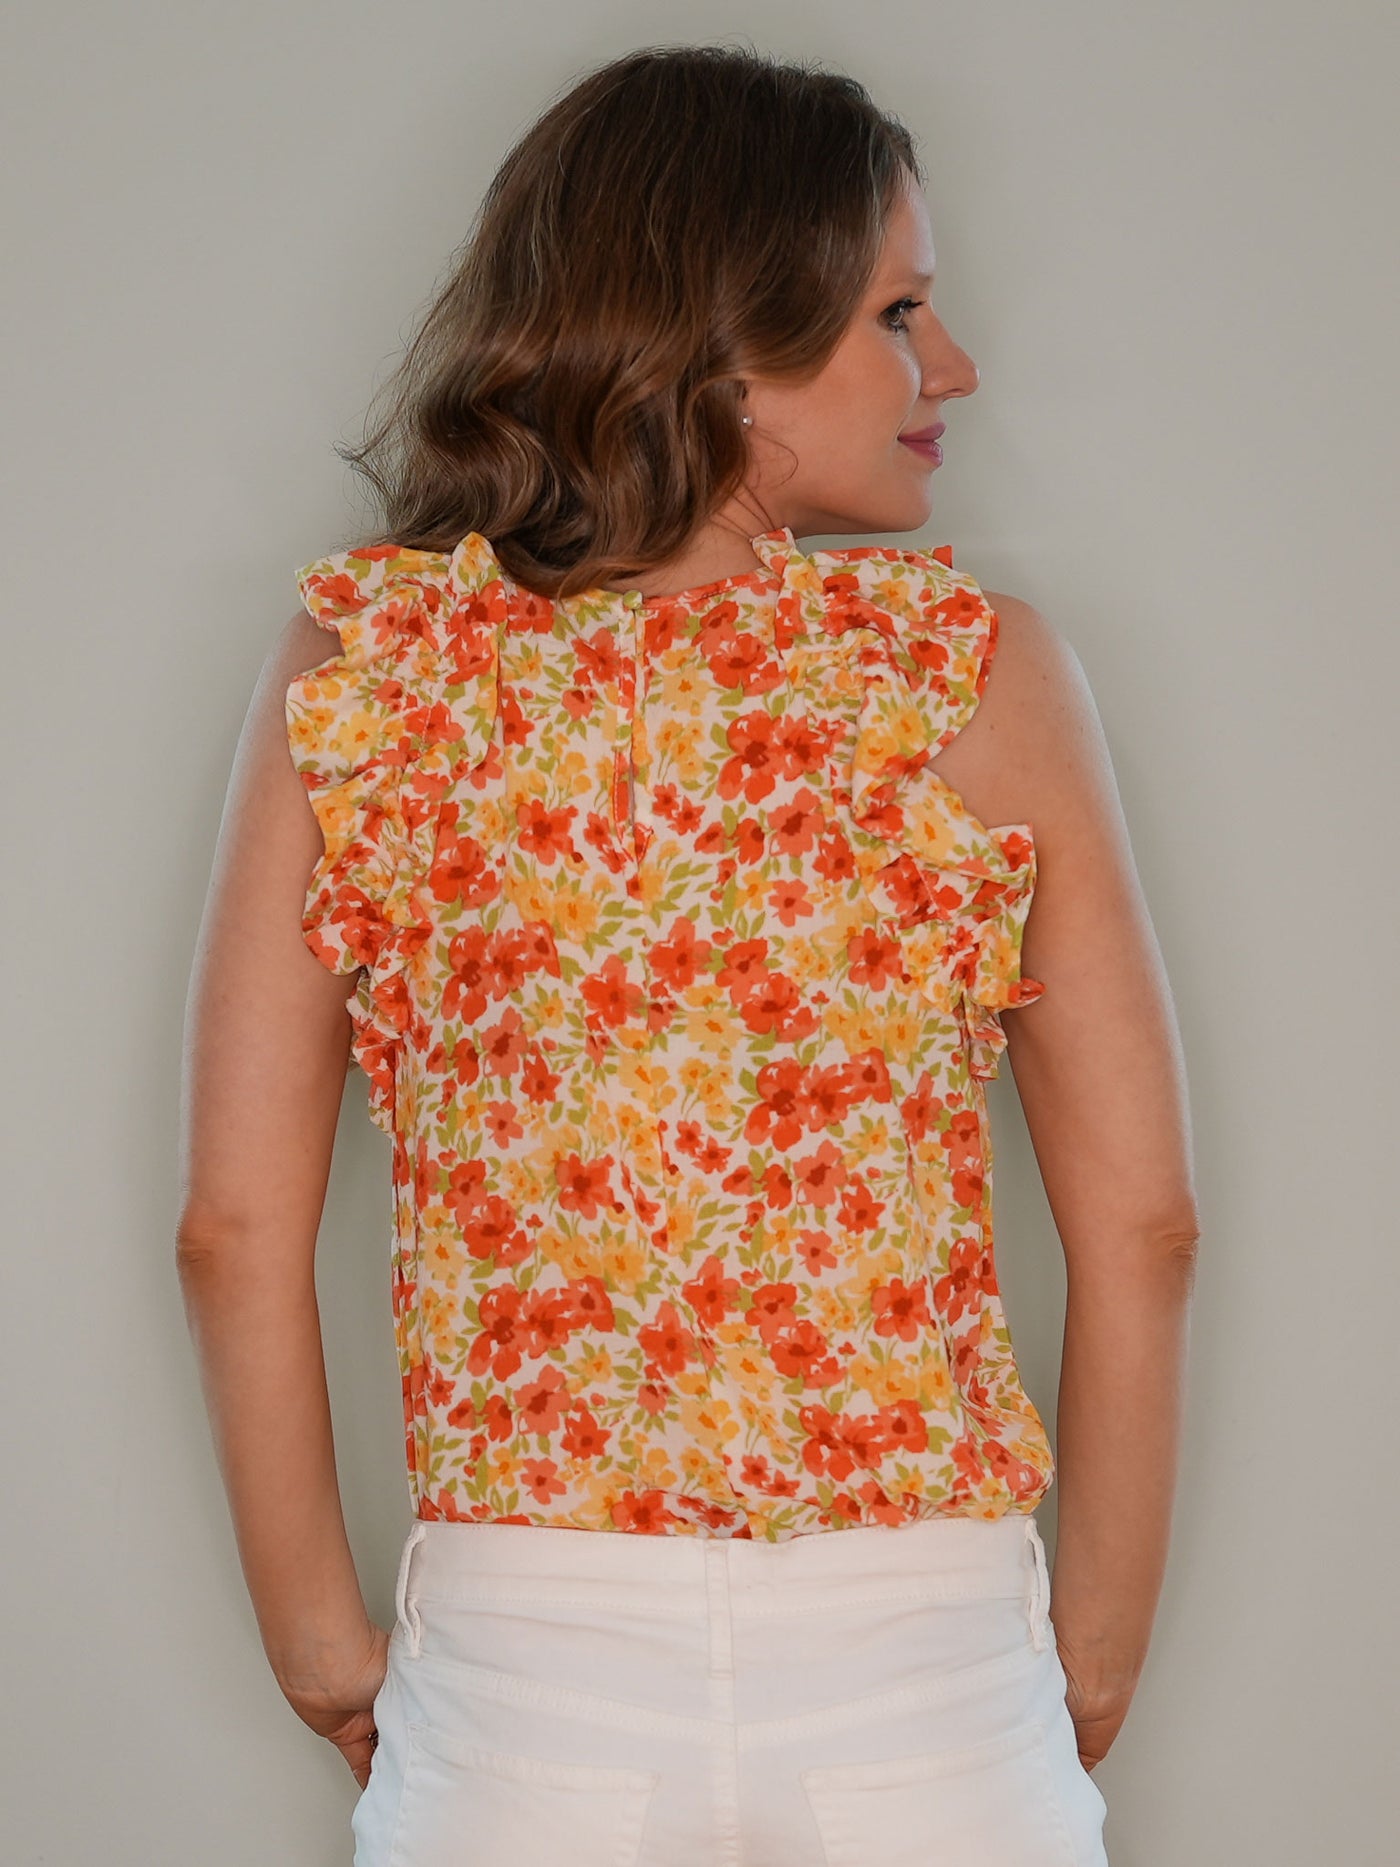 Bright Floral Tank Top with Ruffle Sleeves and Collar - Back